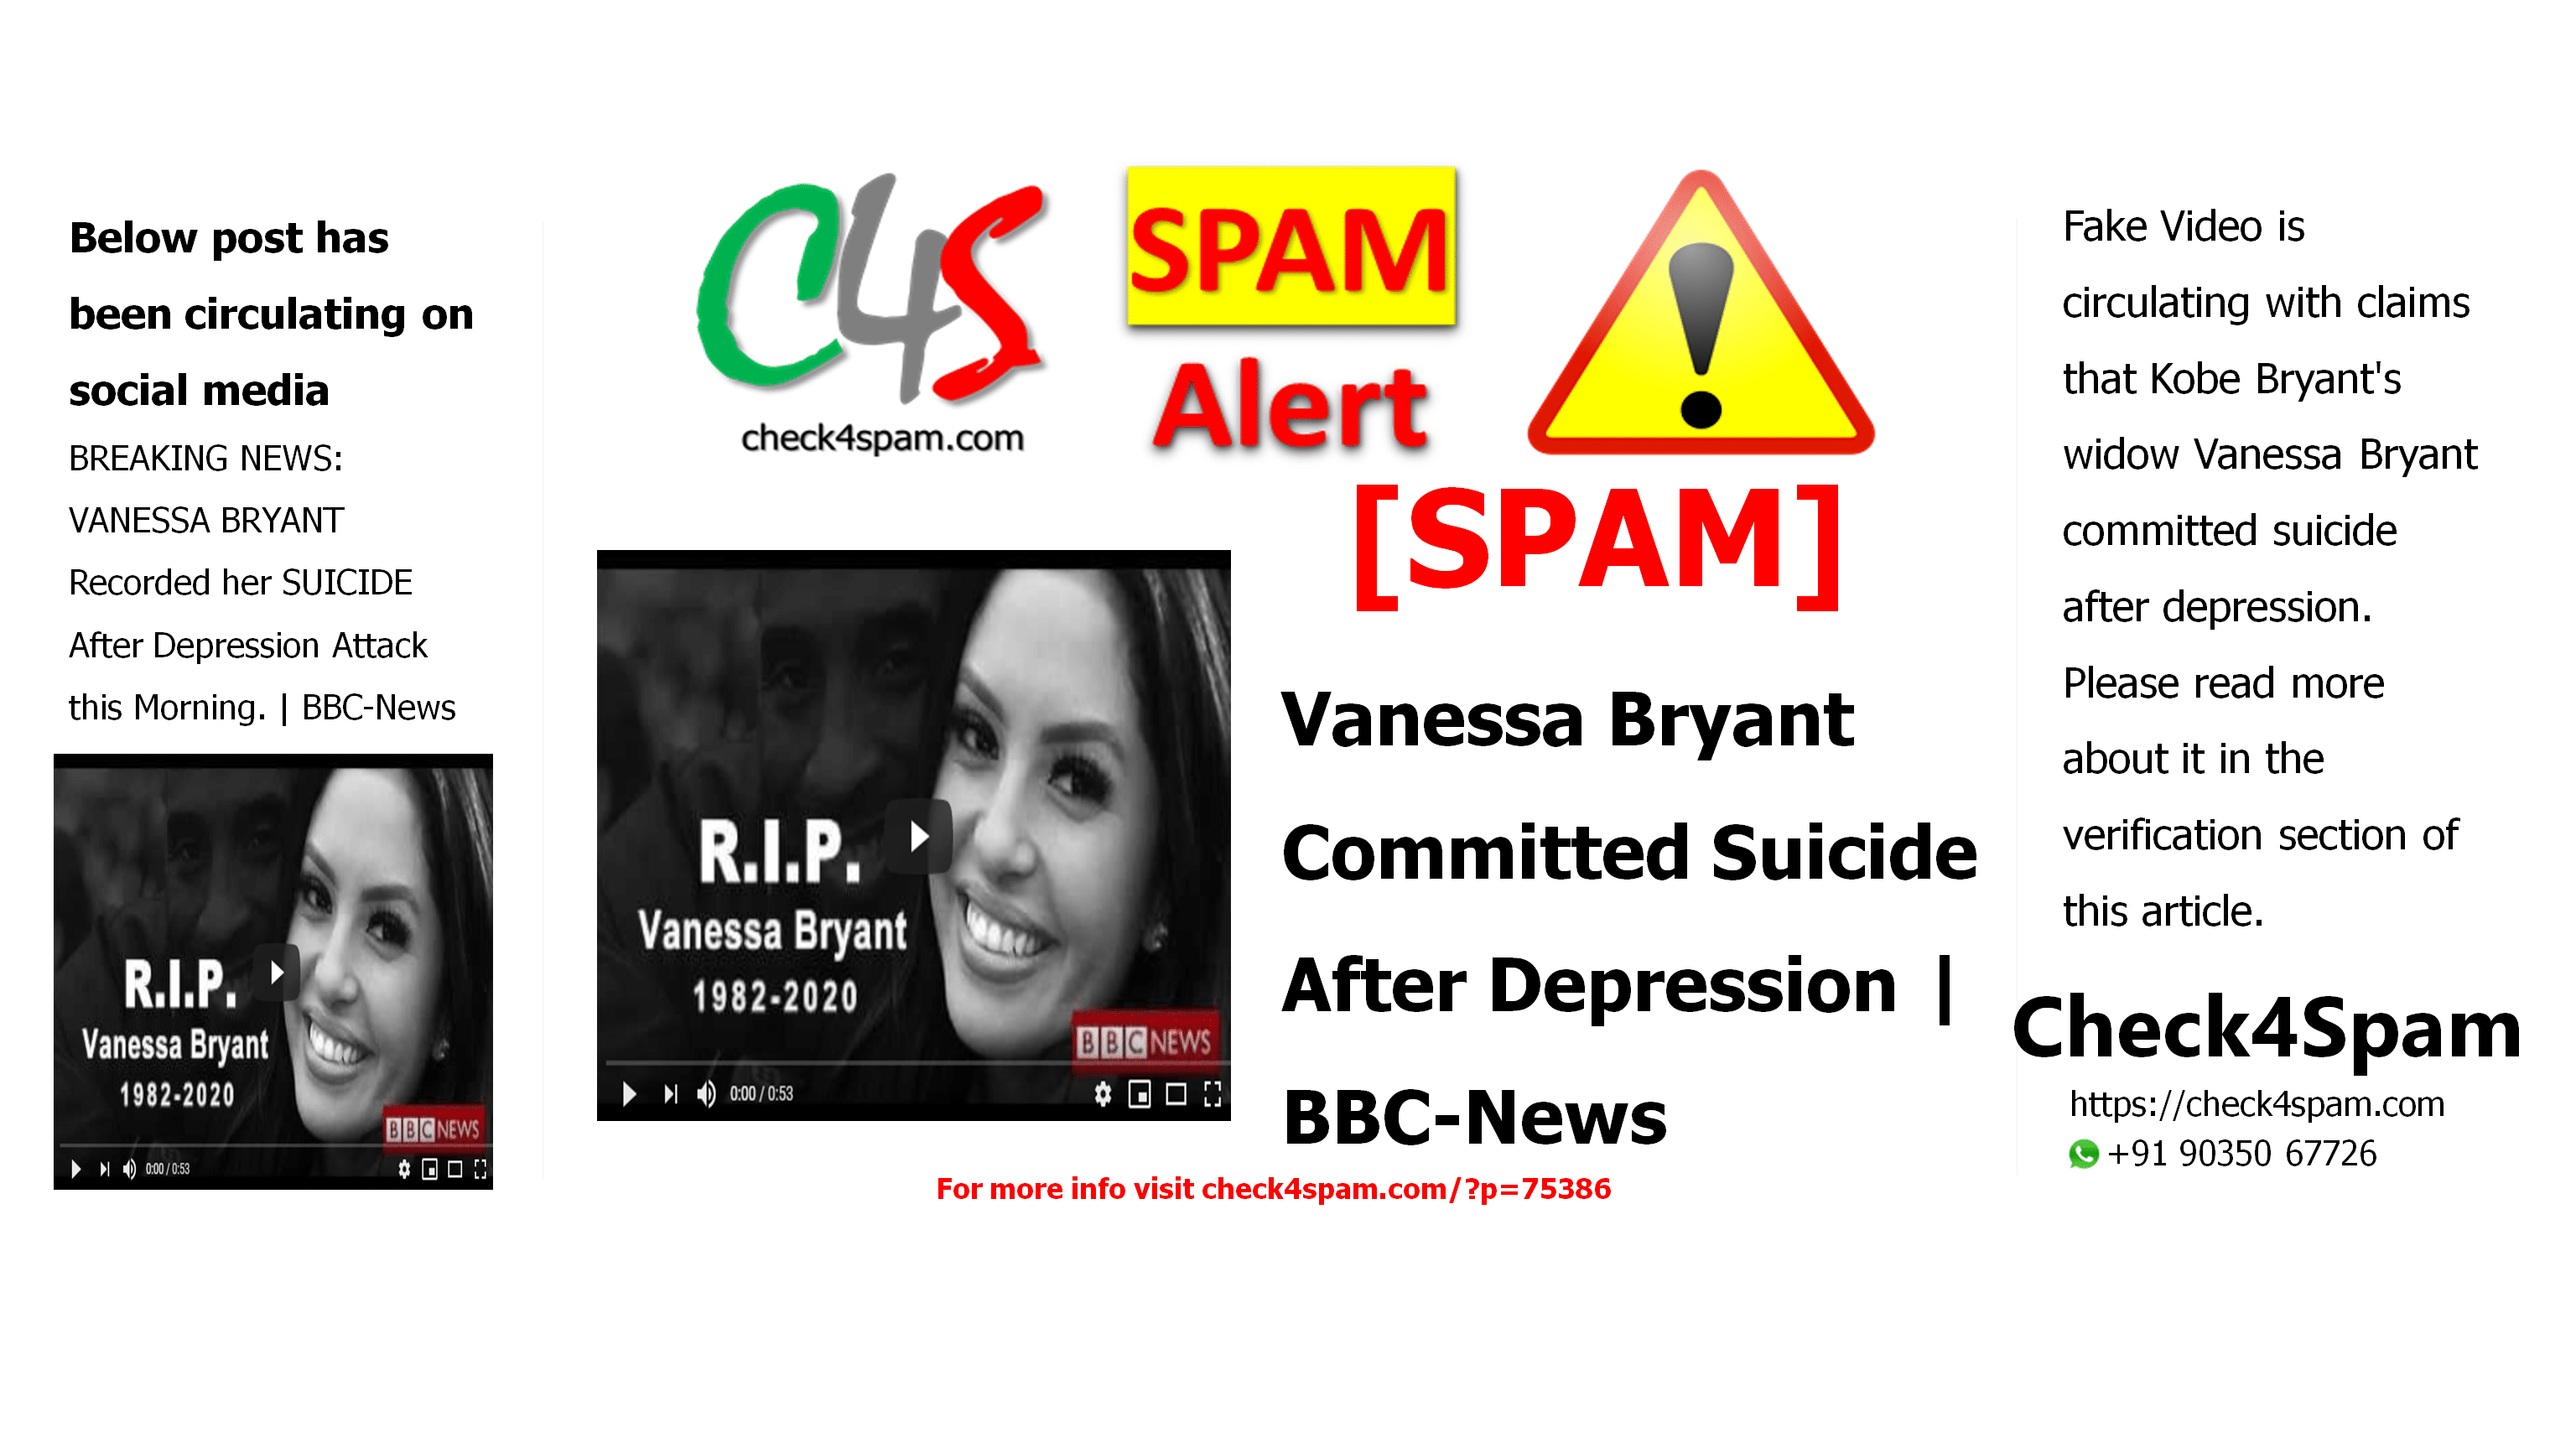 Vanessa Bryant Committed Suicide After Depression | BBC-News